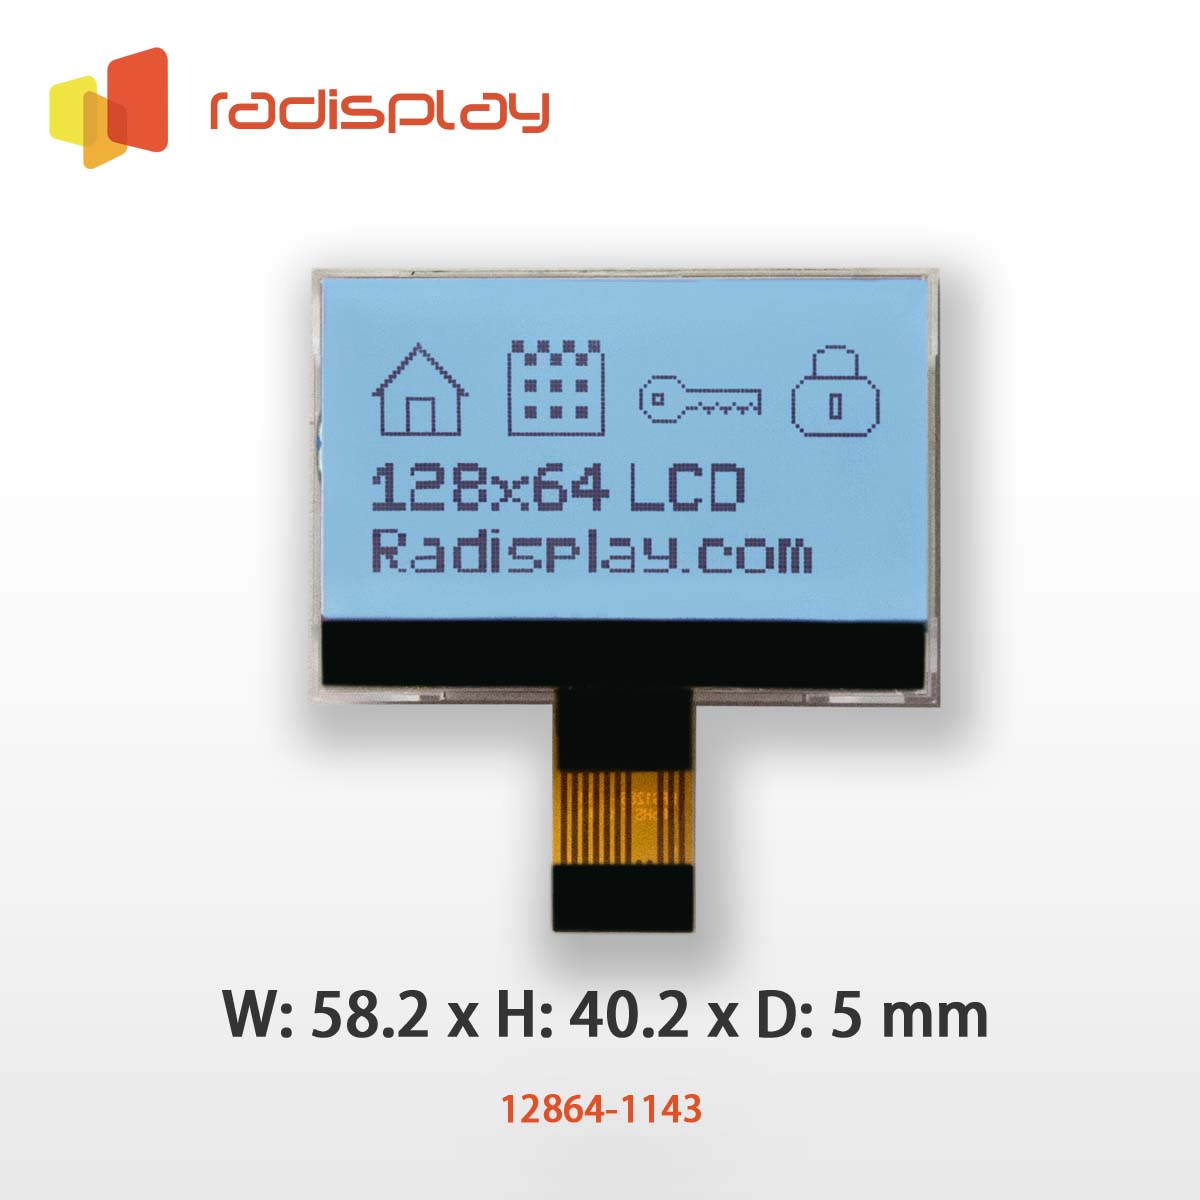 COG(Chip on Glass) LCD